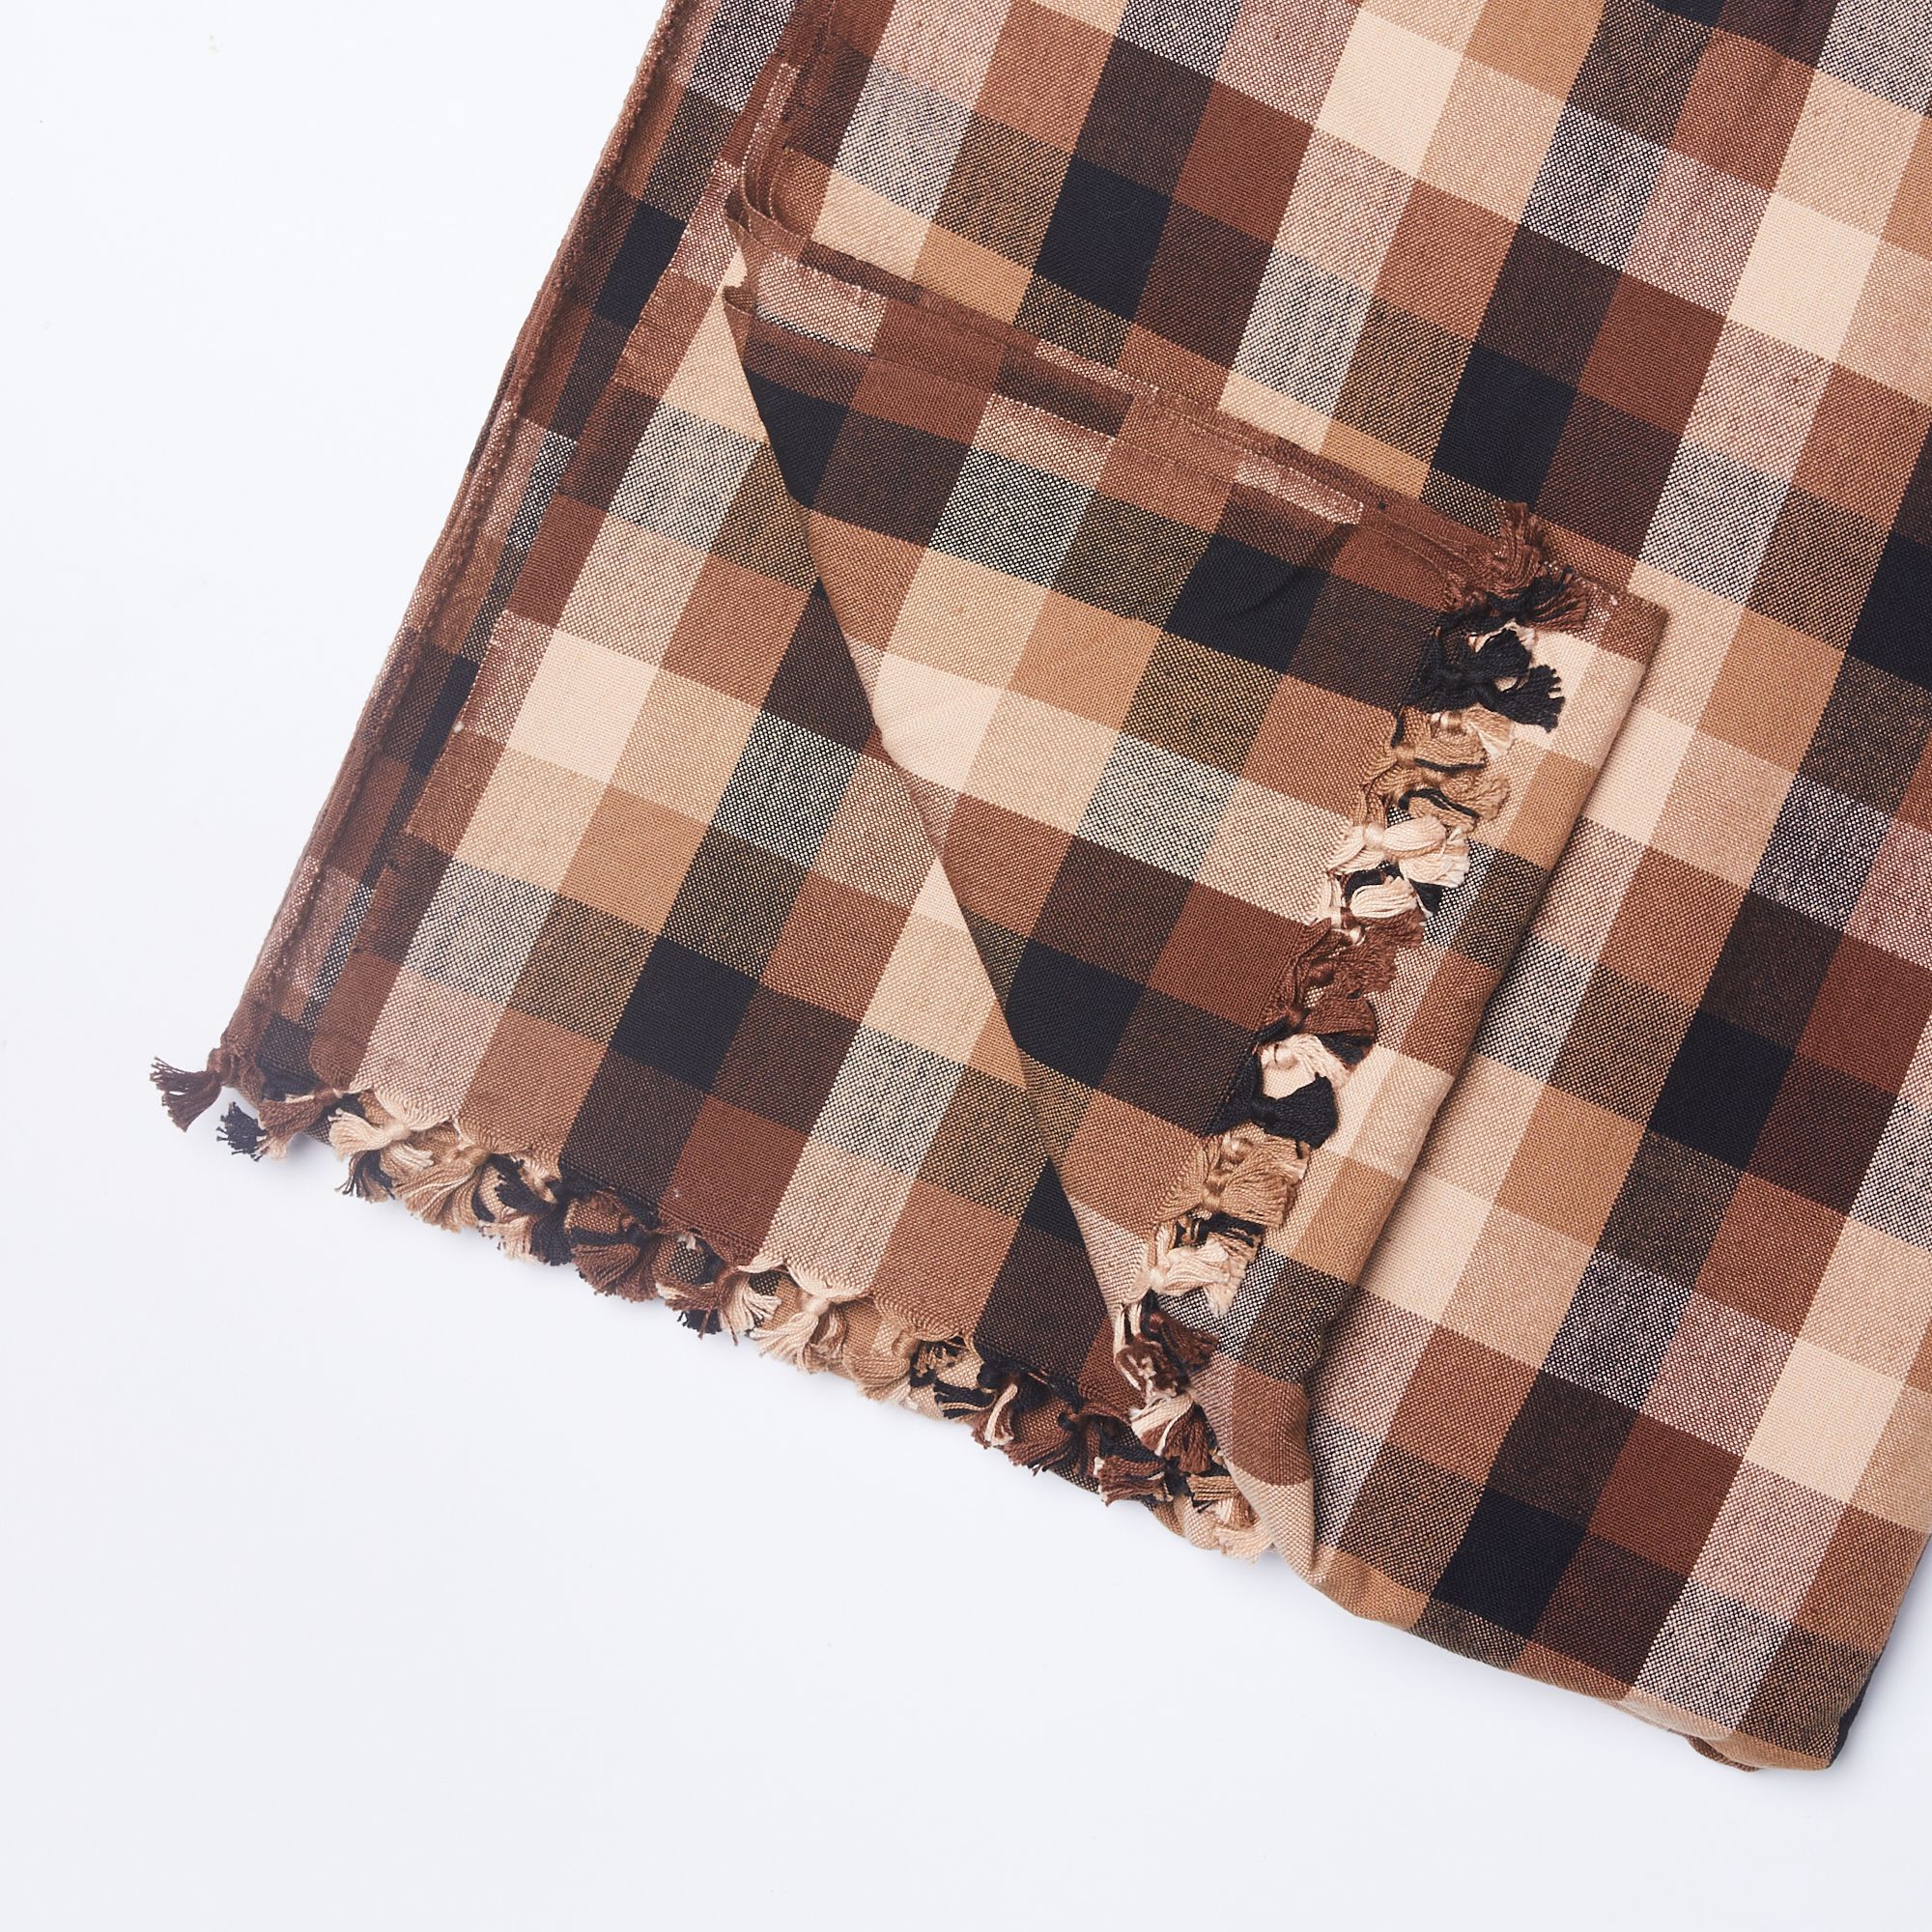 A folded gingham cotton tablecloth in shades of brown with one corner pulled back